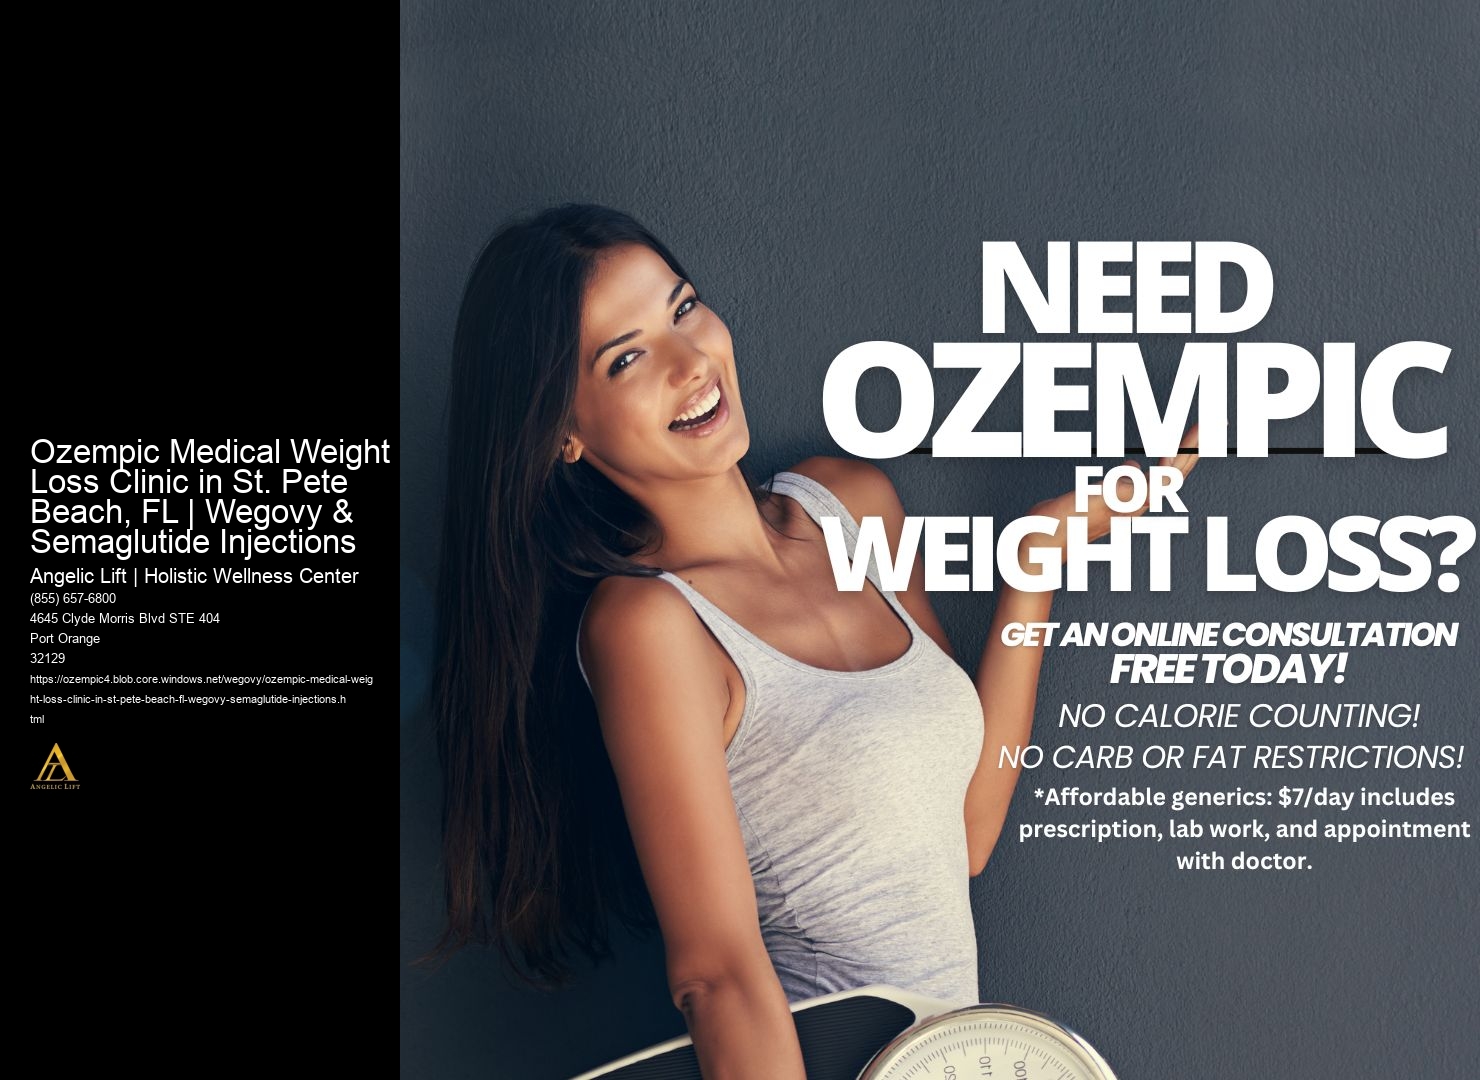 Ozempic Medical Weight Loss Clinic in St. Pete Beach, FL | Wegovy & Semaglutide Injections